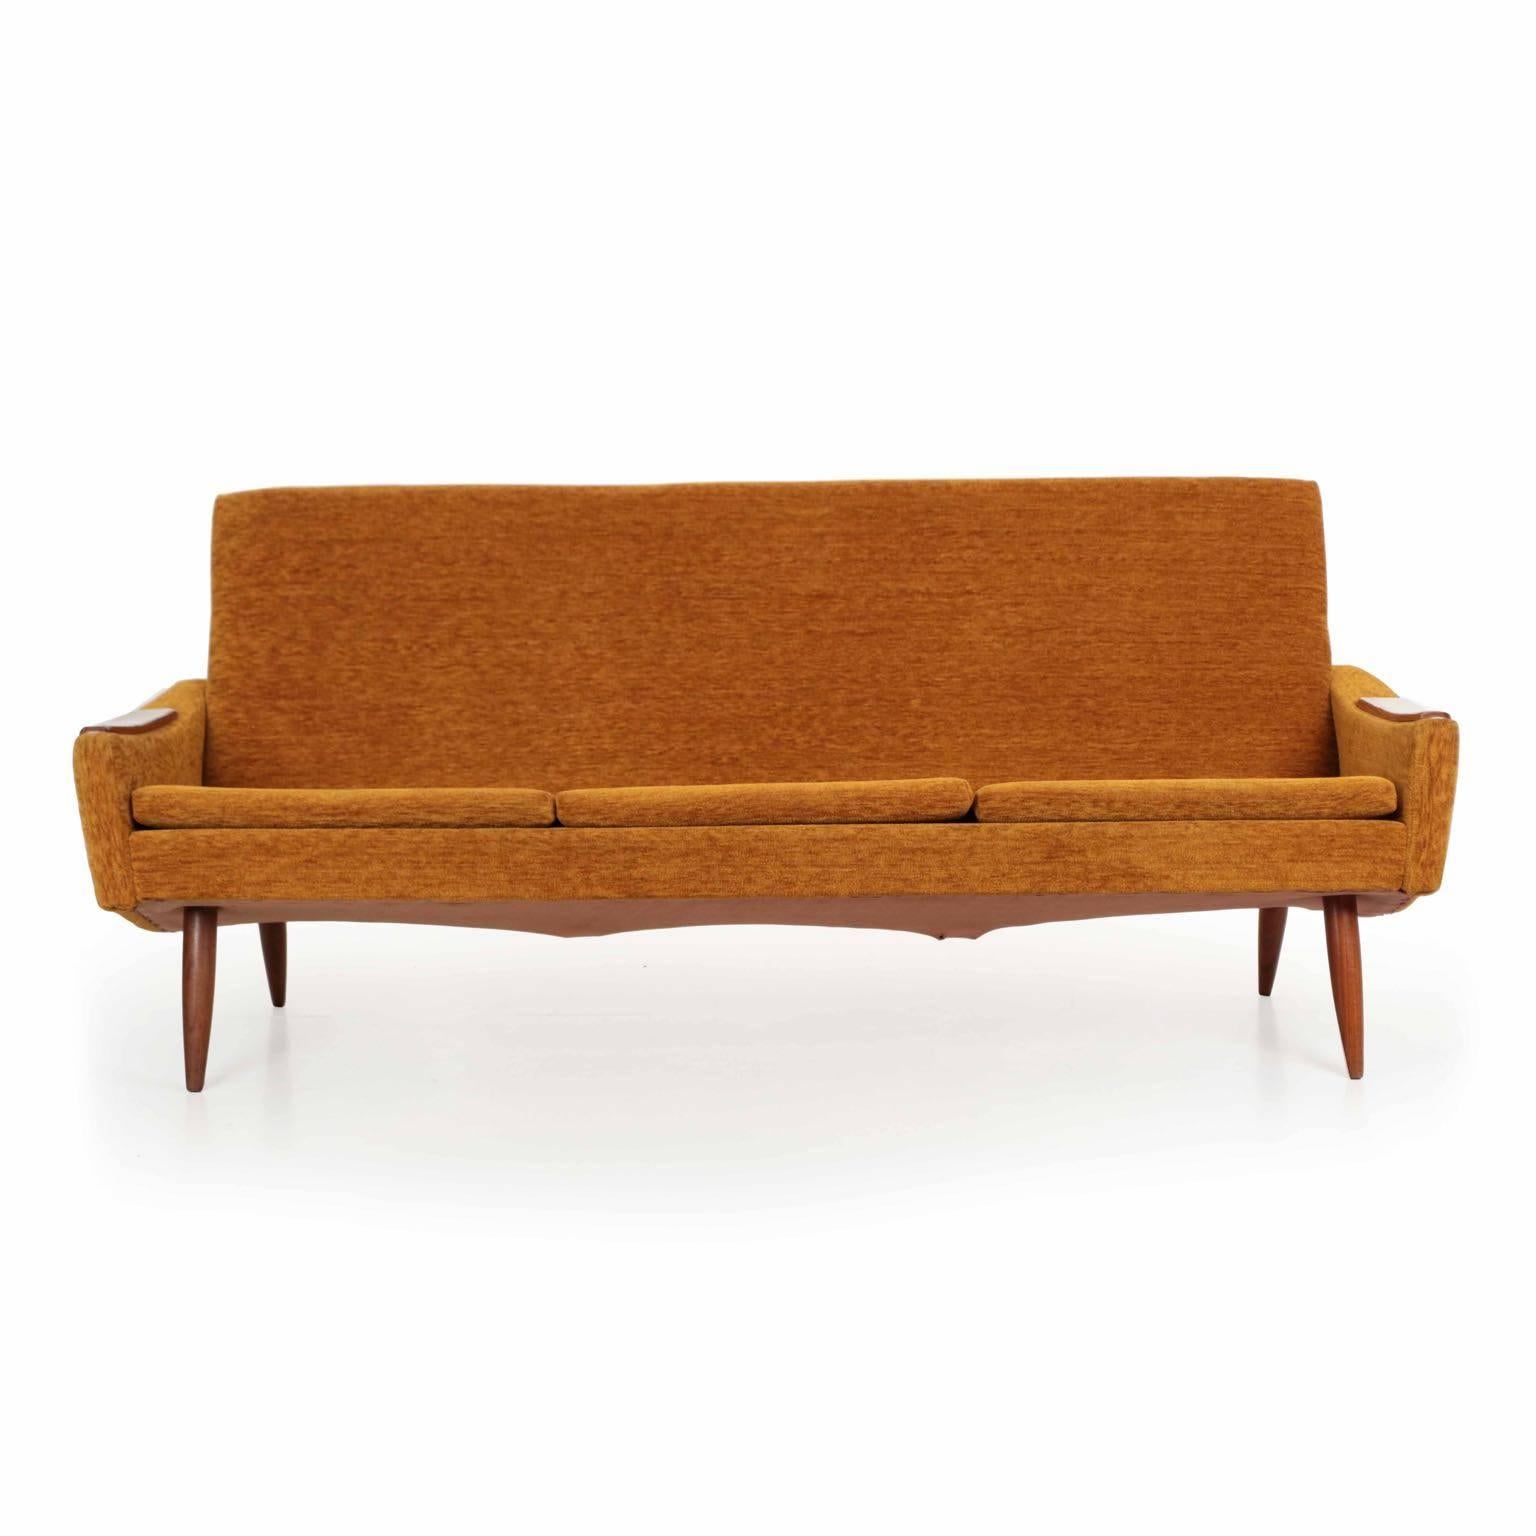 A very handsome and well designed piece, this sleek sofa was recovered at some point in a vintage orange covering that remains in excellent overall condition. A distinct angularity is found in the curvature of the back and the inward cant of the